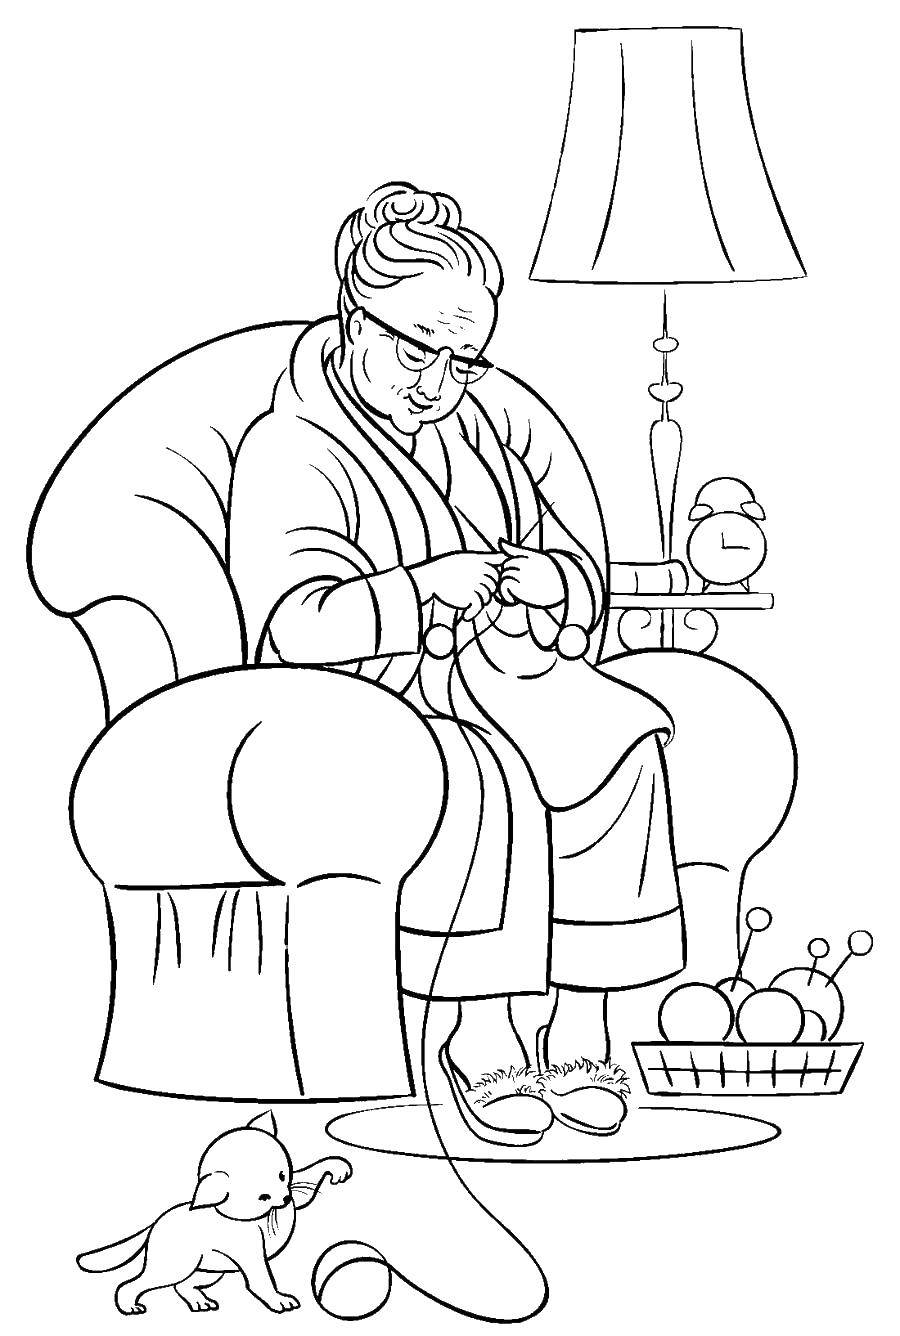 Coloring Grandma knits. Category Chair. Tags:  cat playing with a ball, the grandmother knits spokes, floor lamp.